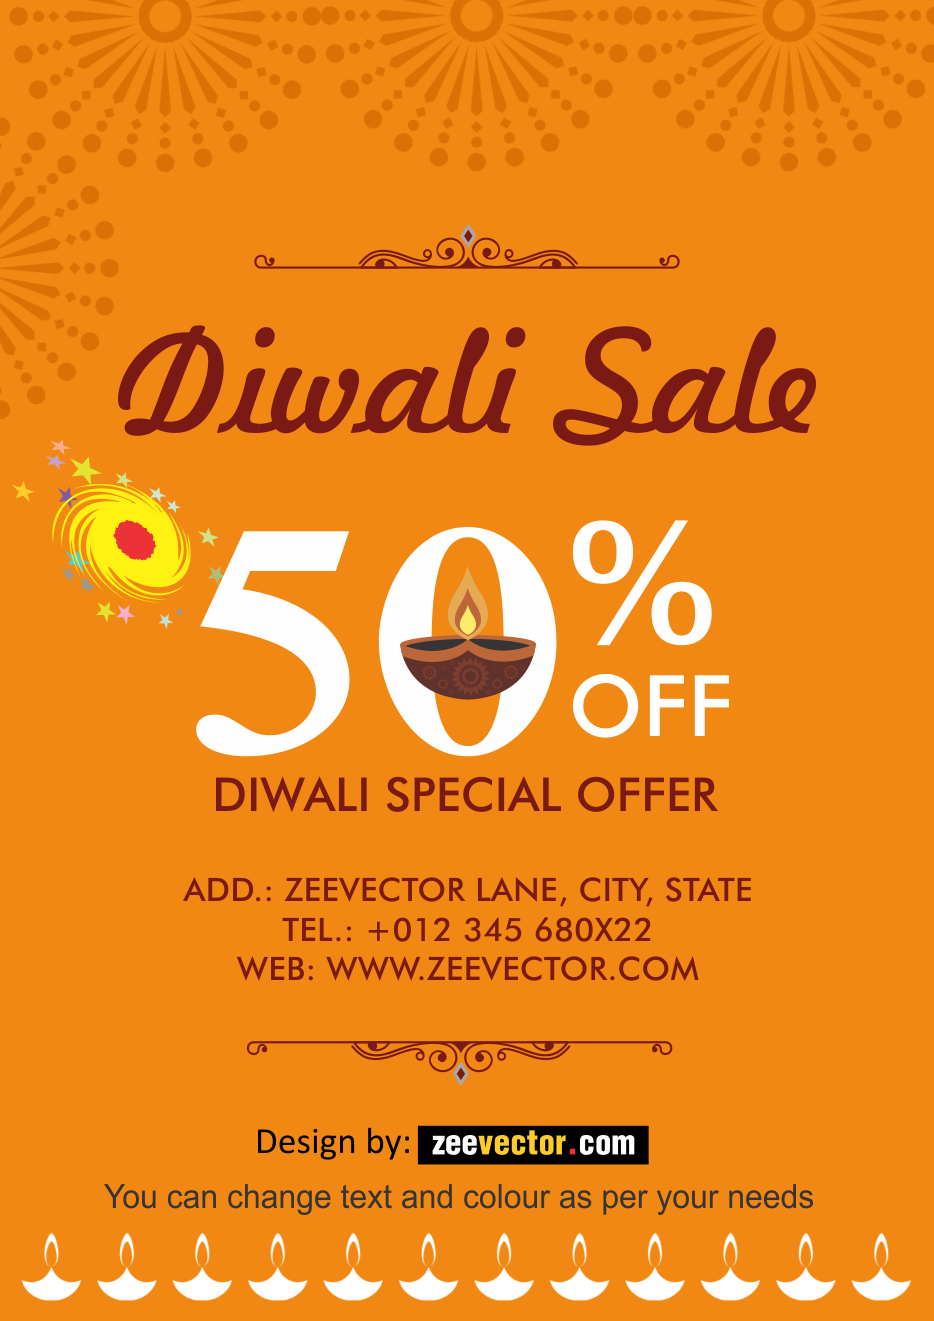 Diwali Vector Archives - Page 2 of 6 - FREE Vector Design - Cdr, Ai, EPS,  PNG, SVG